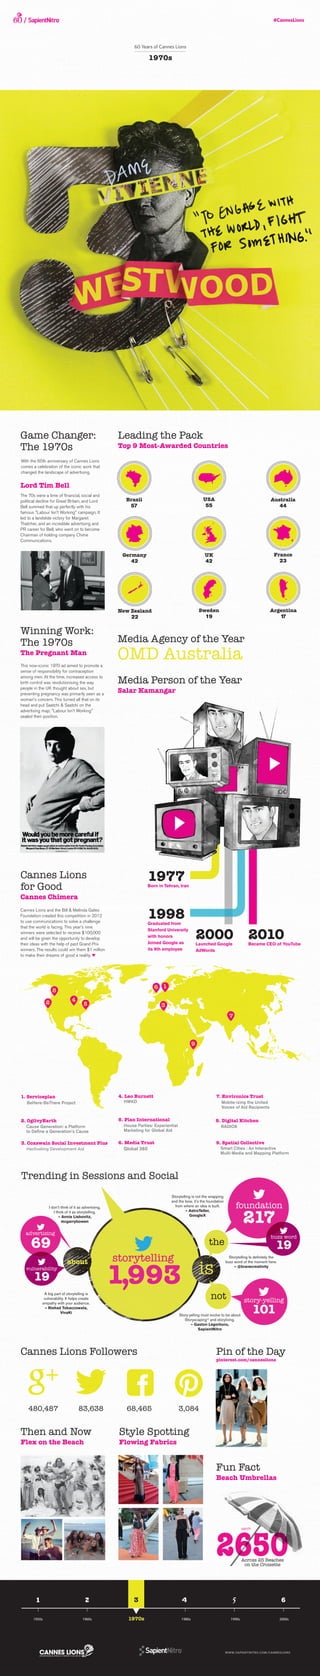 The third of six 2013 Cannes Lions and SapientNitro infographics 